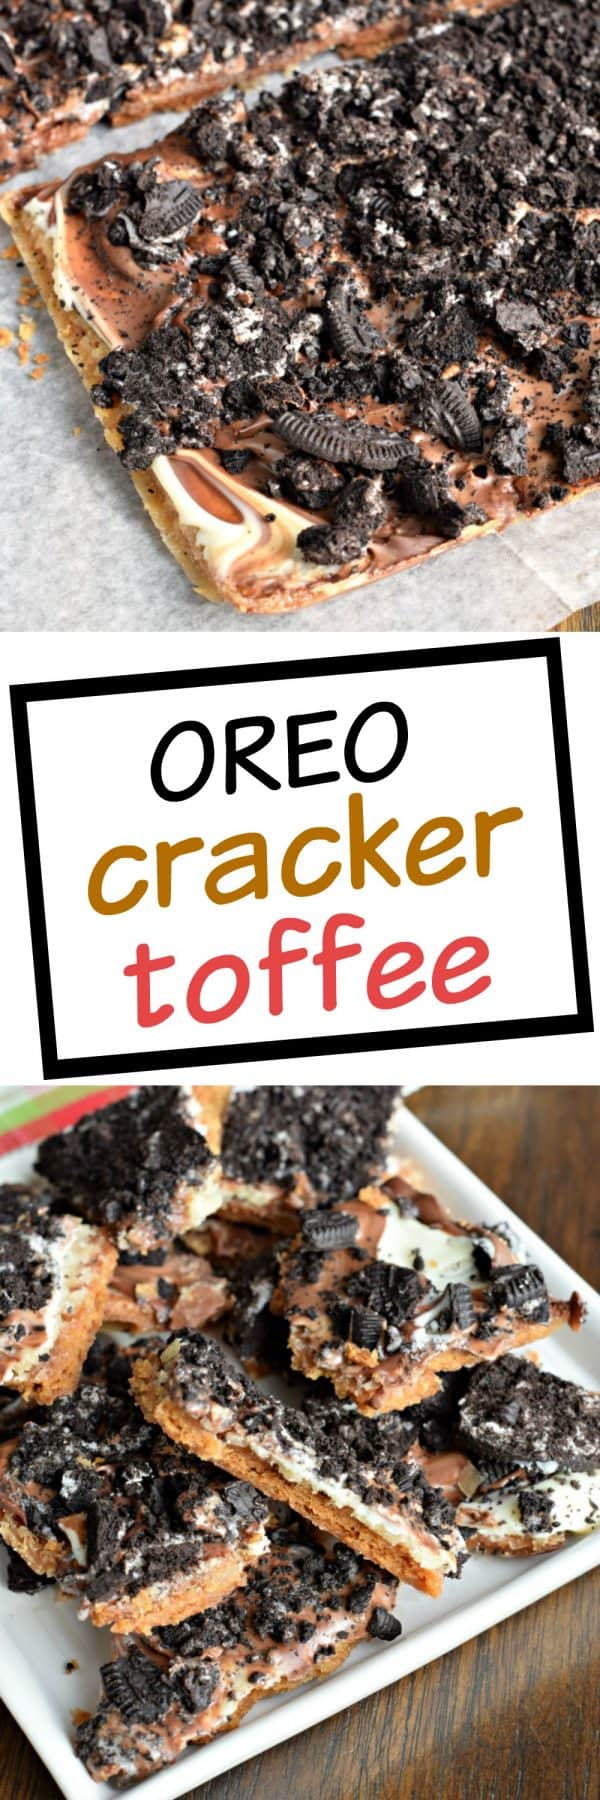 Oreo Toffee is a sweet and scrumptious snack! This is one party dessert everyone will devour!